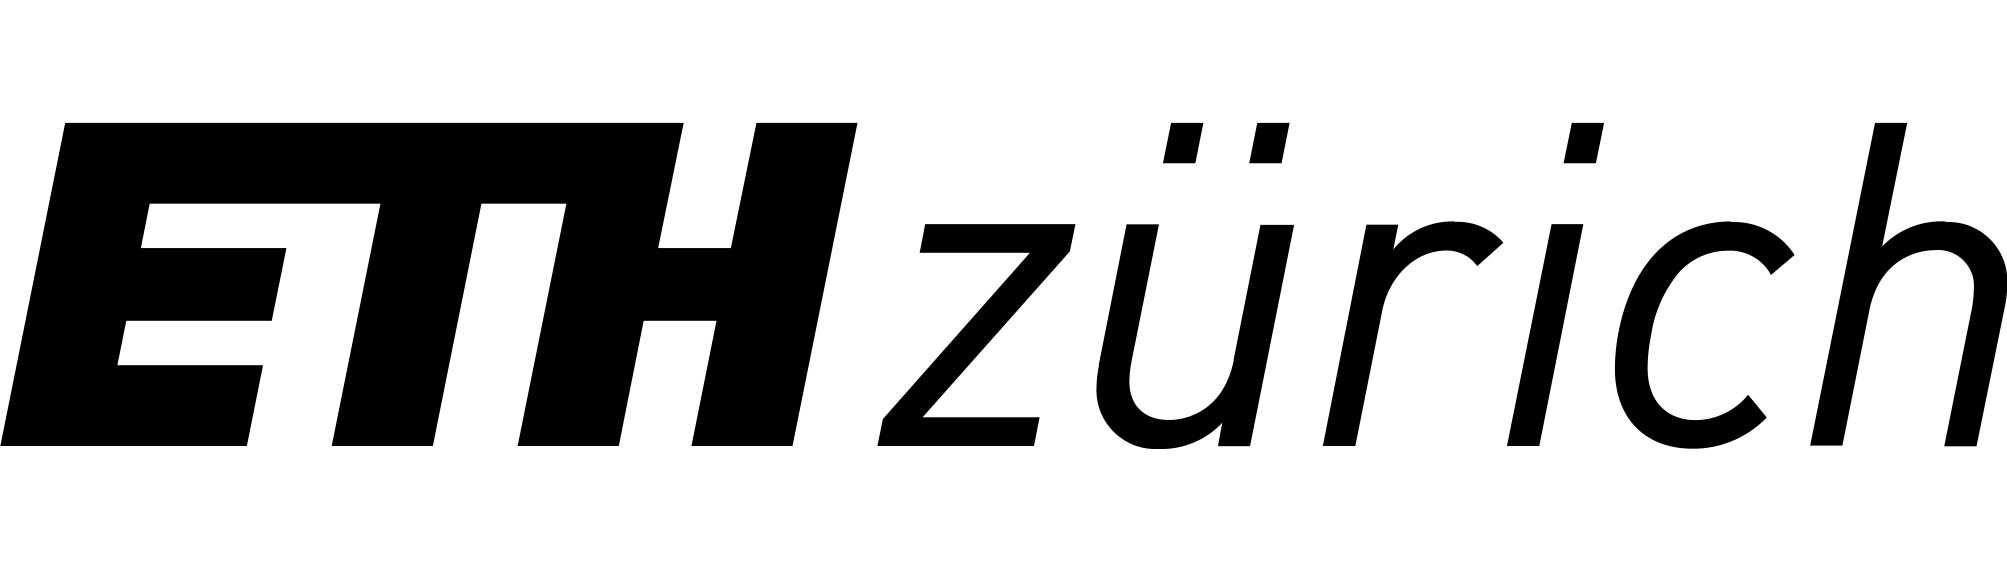 logos of ETH Zurich, University of Zurich, and University of Basel